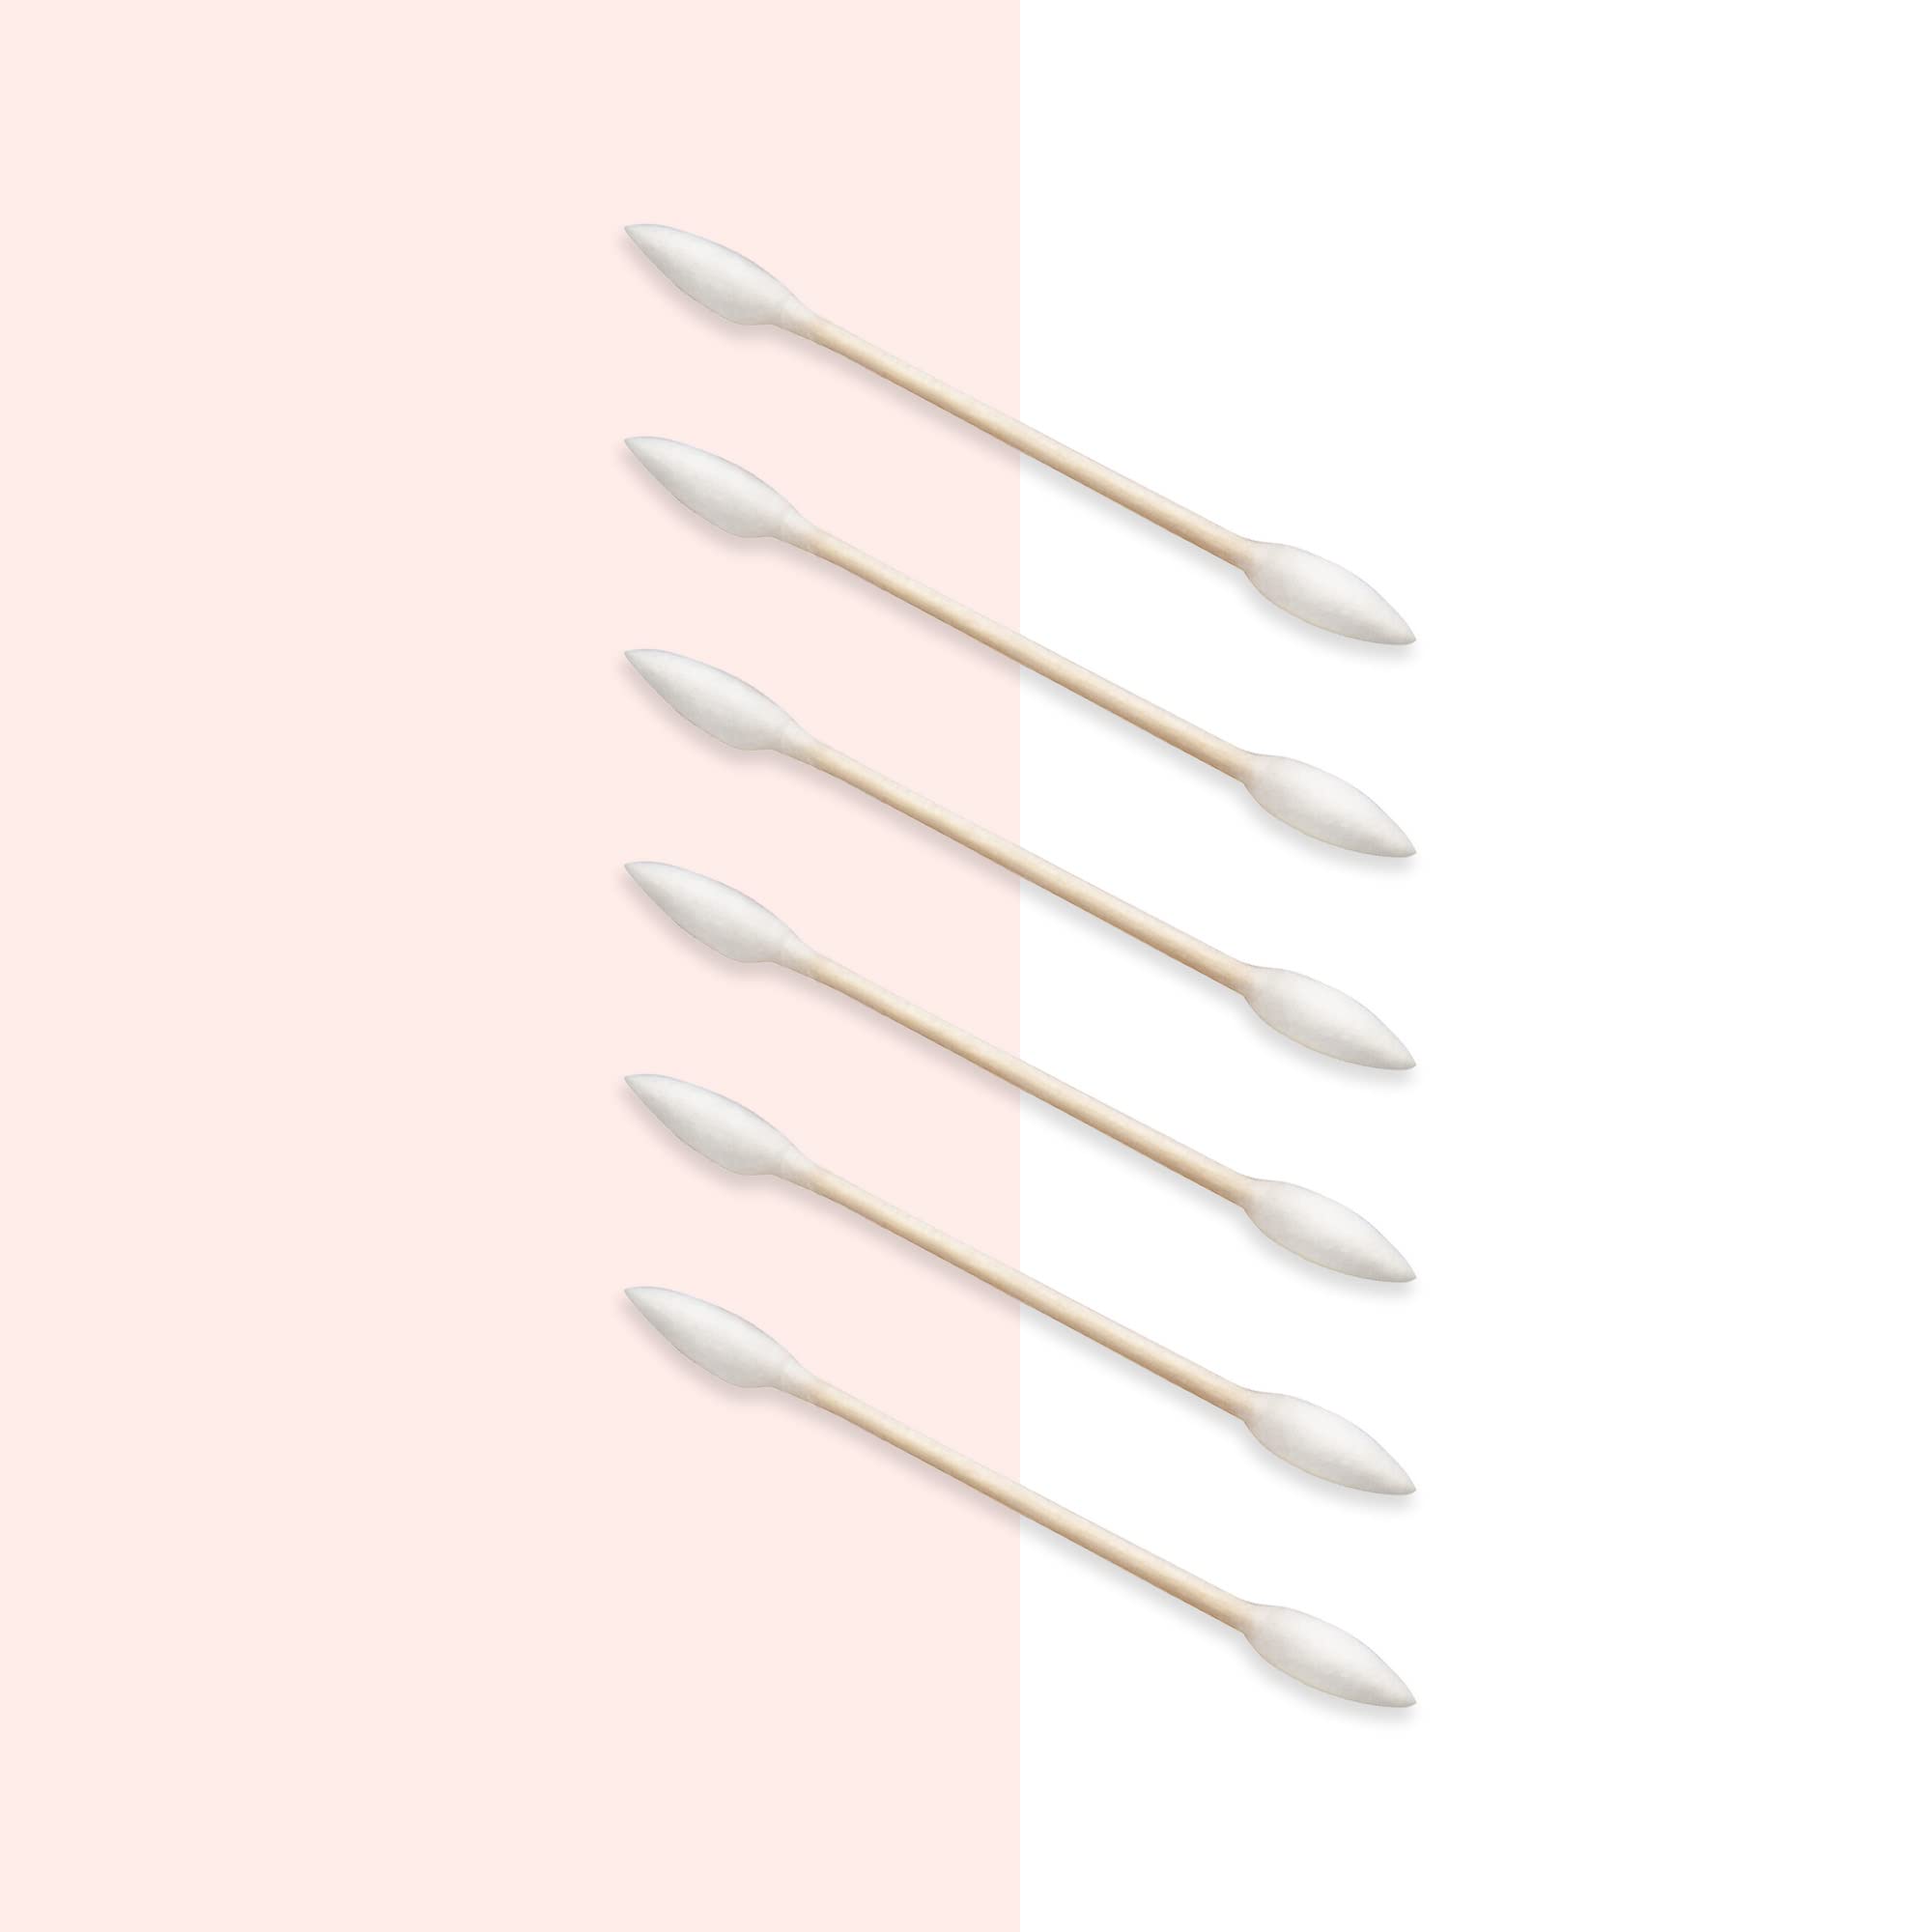 Diane Pointed Tip Cotton Swabs, 200 ct. 1-Pack - Super Soft for Sensitive Skin, Gentle on Face, Makeup and Beauty Applicator, Nail Polish Touch Up and Nail Design for Beauty, Personal Care, Crafts